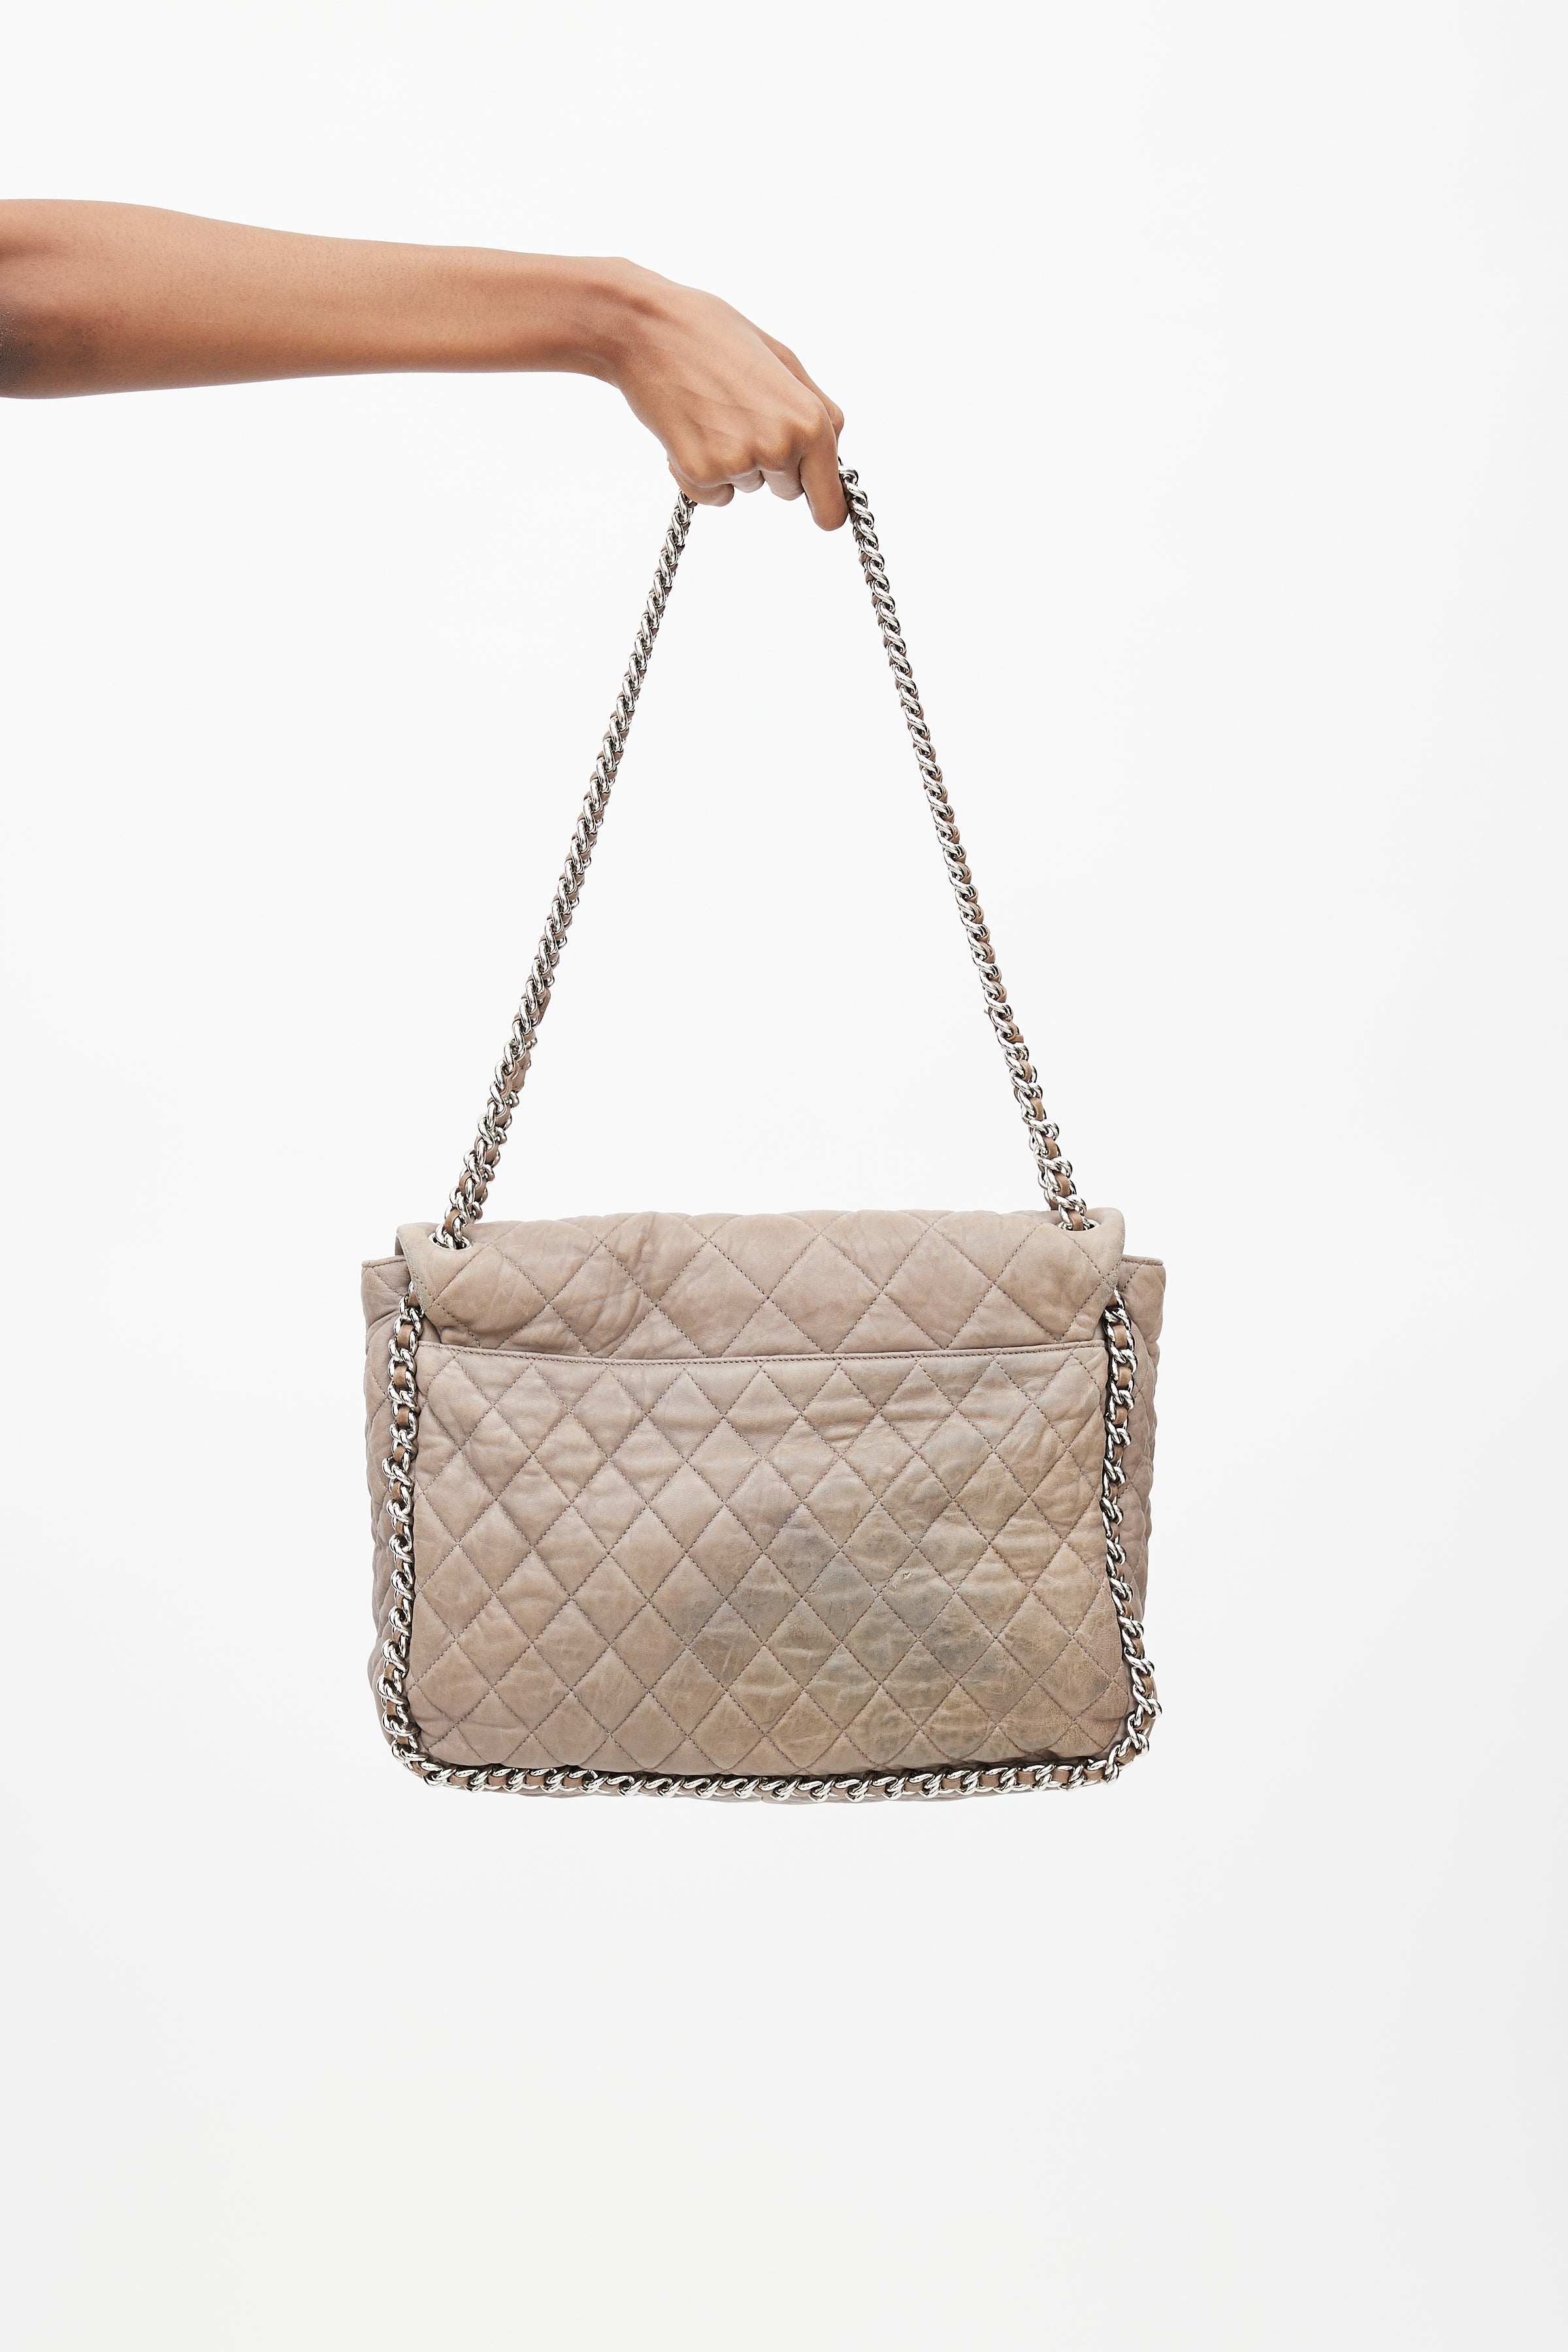 Chanel // 2010 Grey Leather Chain Around Shoulder Bag – VSP Consignment